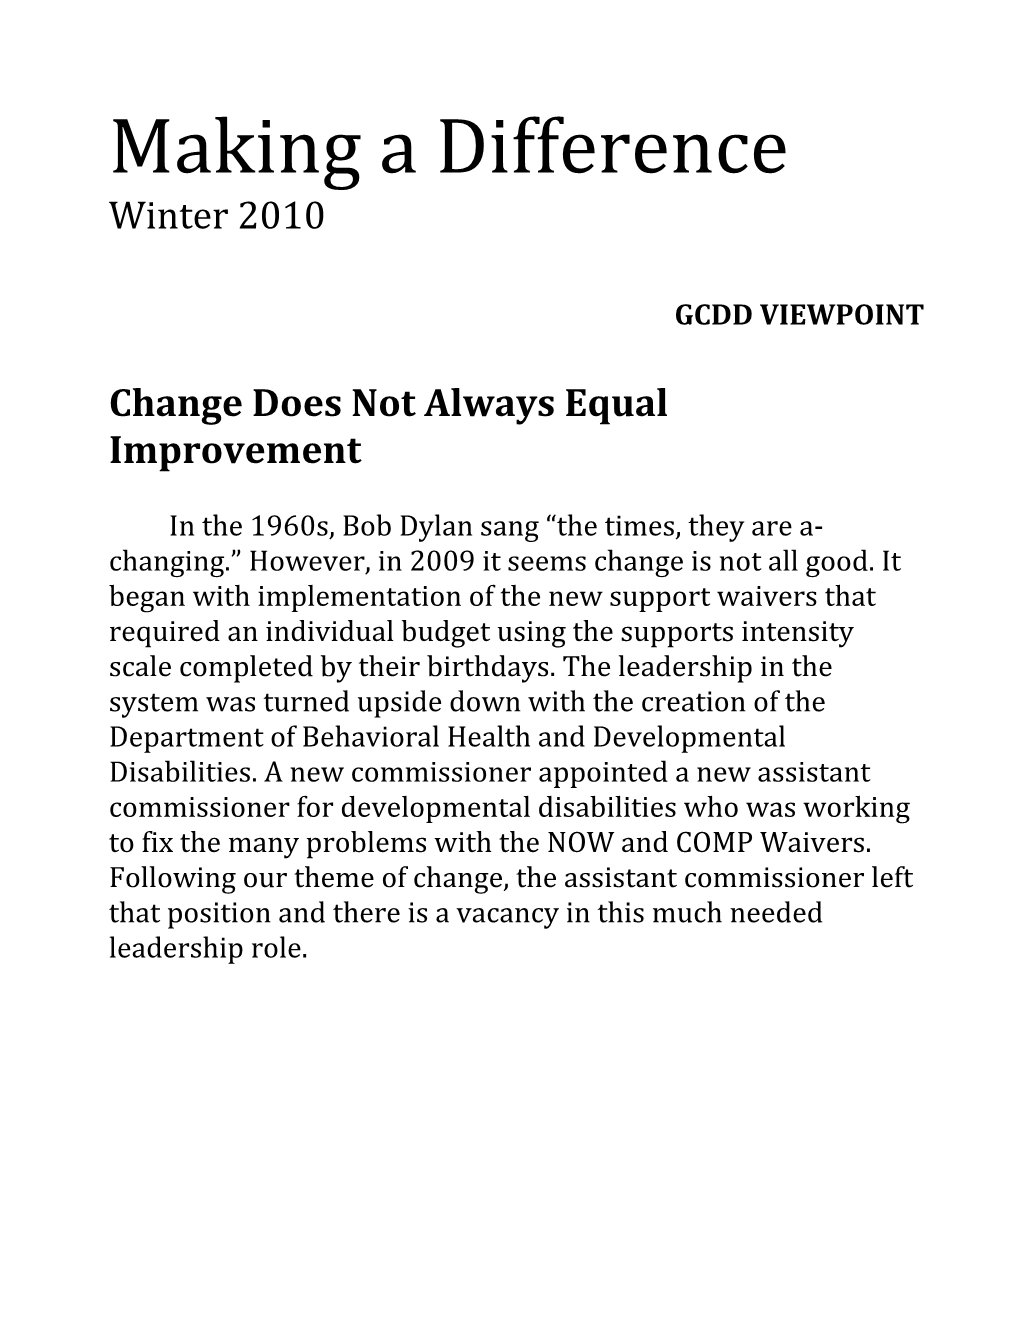 Change Does Not Always Equal Improvement